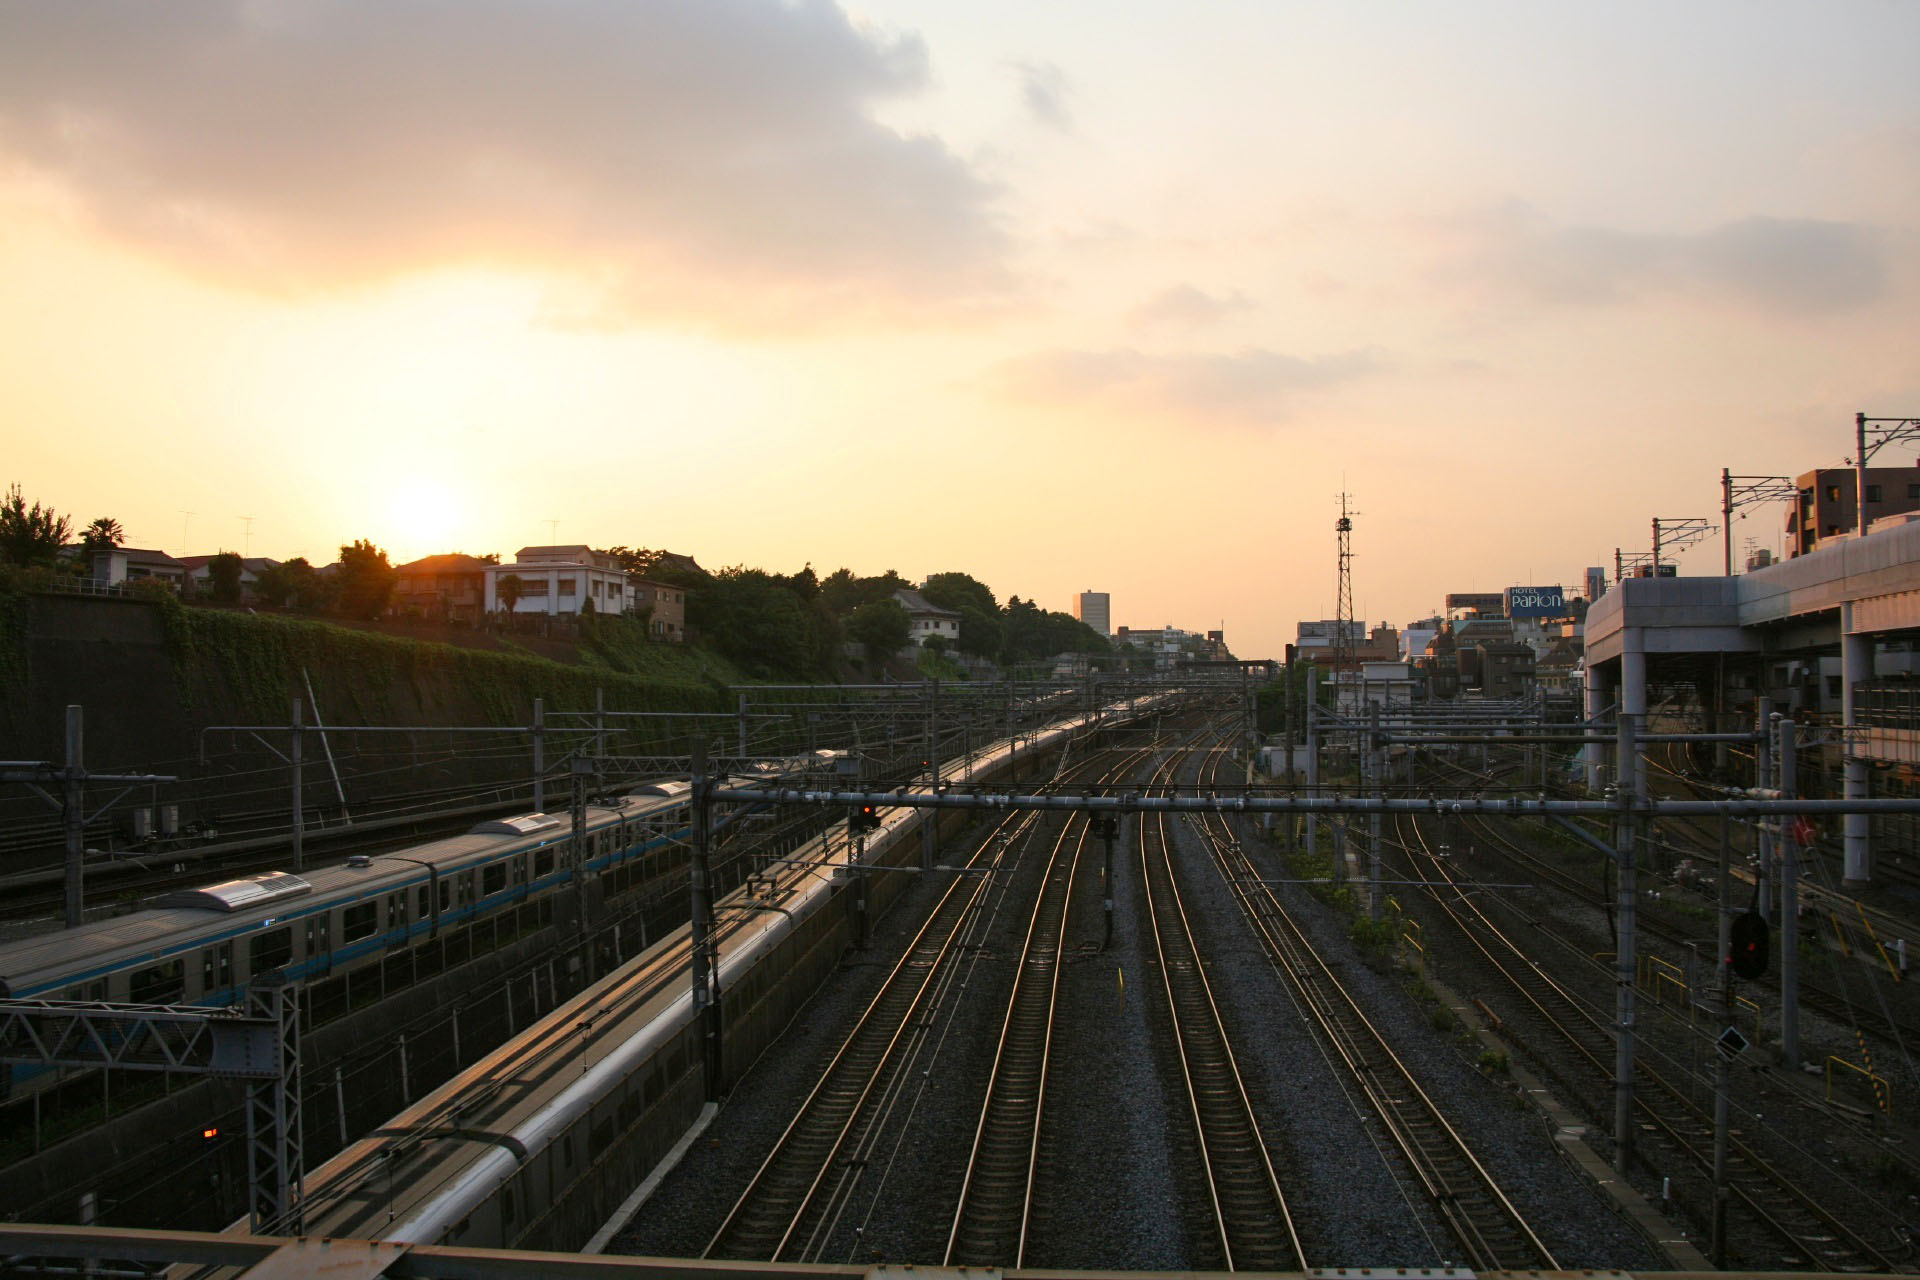 Nippori station in evening